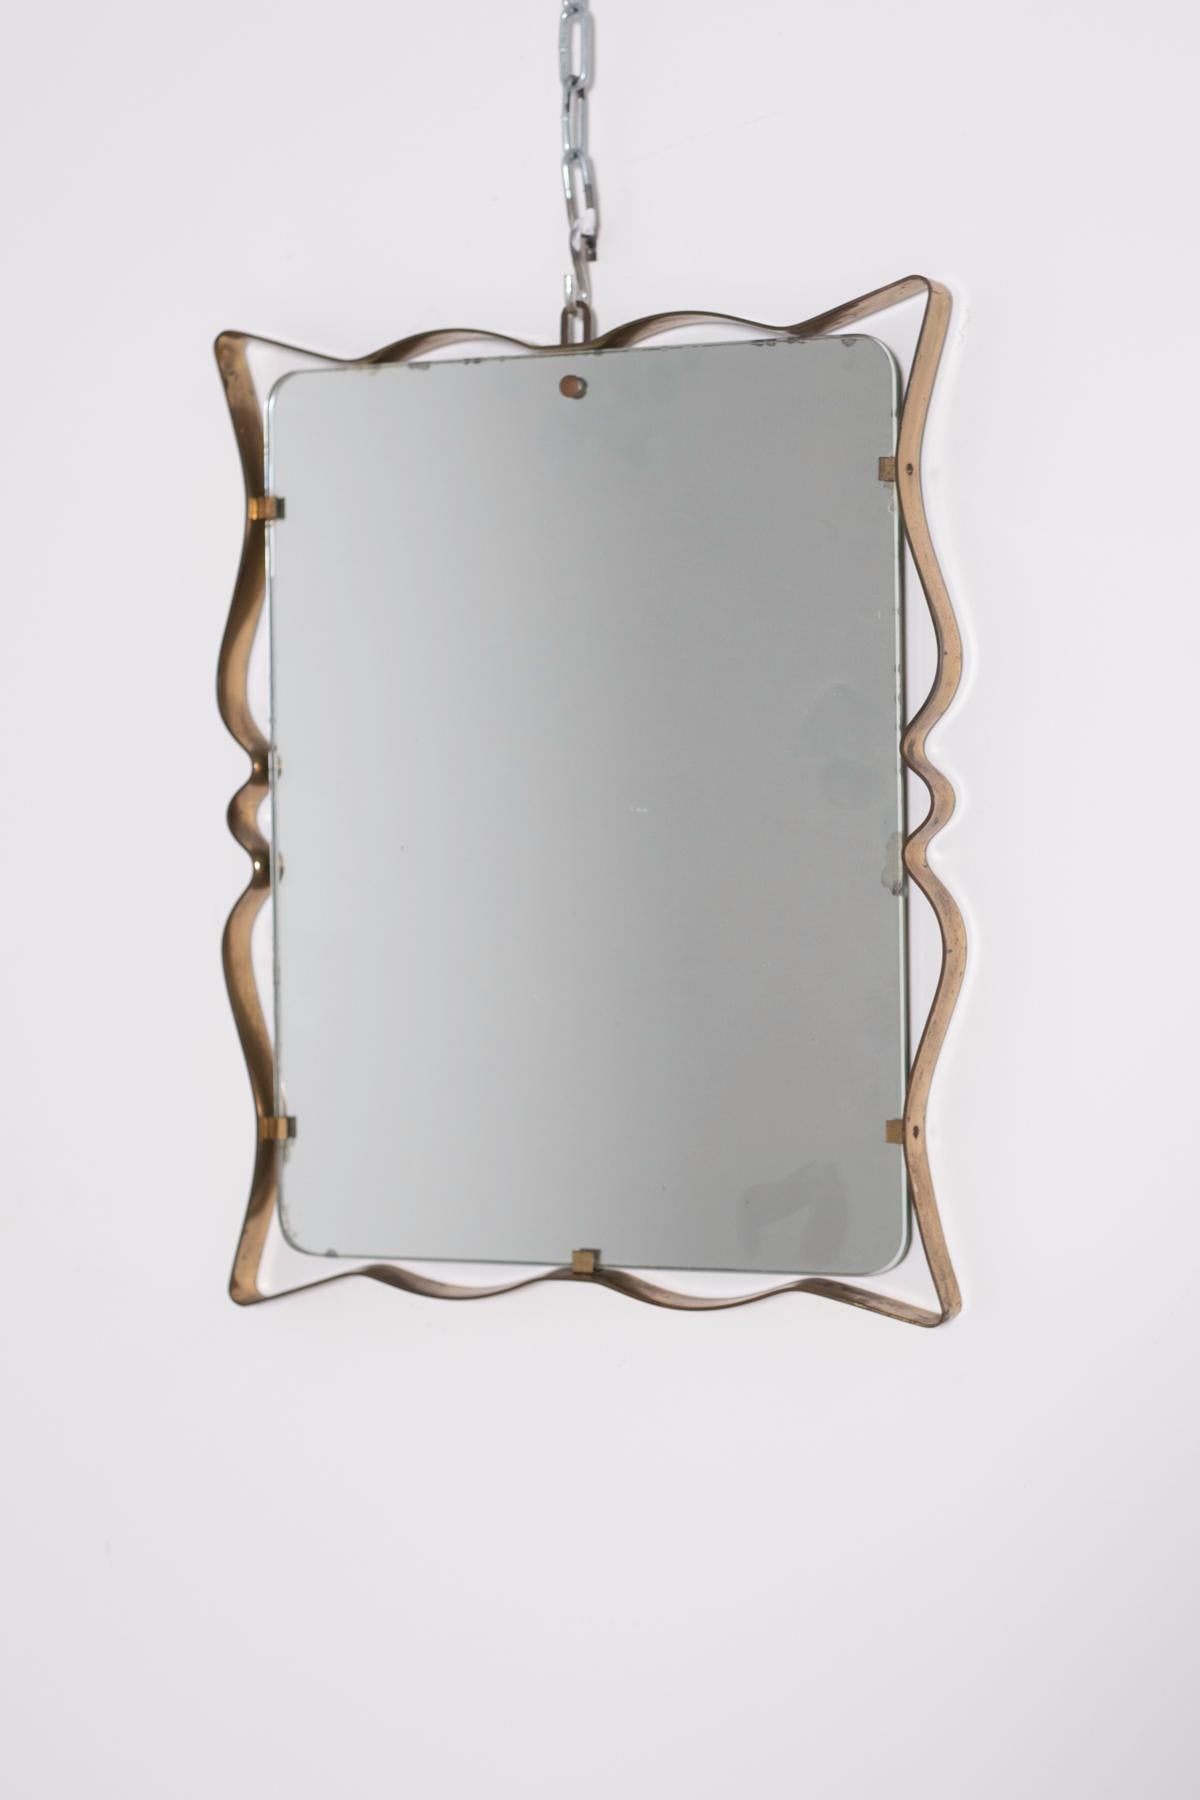 Elegant and sophisticated wall mirror produced by Fontana Arte, Italy, circa 1950.
The mirror has a shaped profile in brass curves that creates a delicate undulation to the object. Its brass profile is detached from the glass and connected to the